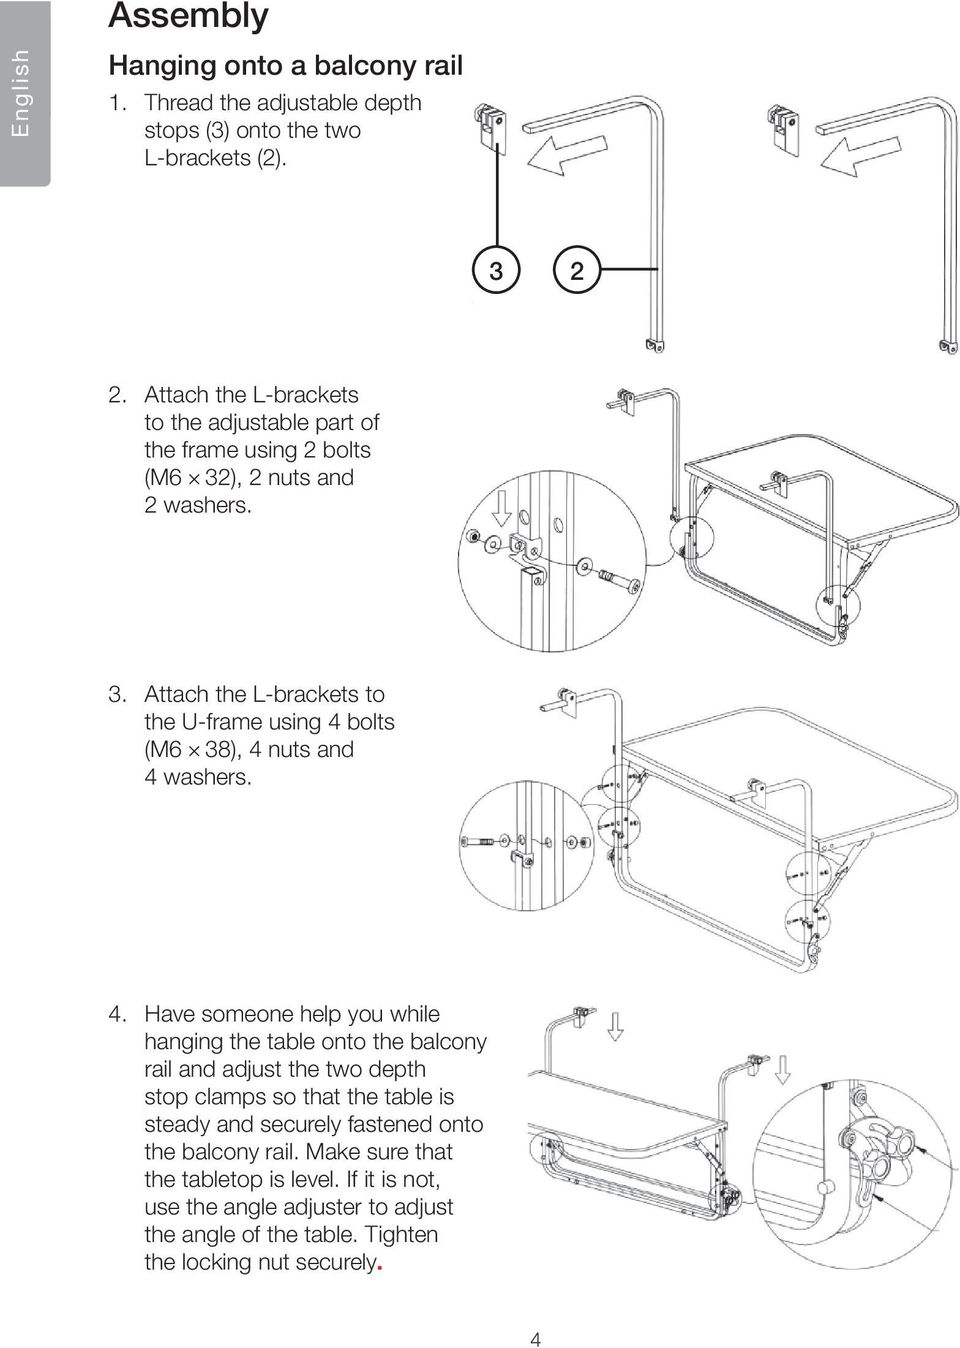 ), 2 nuts and 2 washers. 3. Attach the L-brackets to the U-frame using 4 